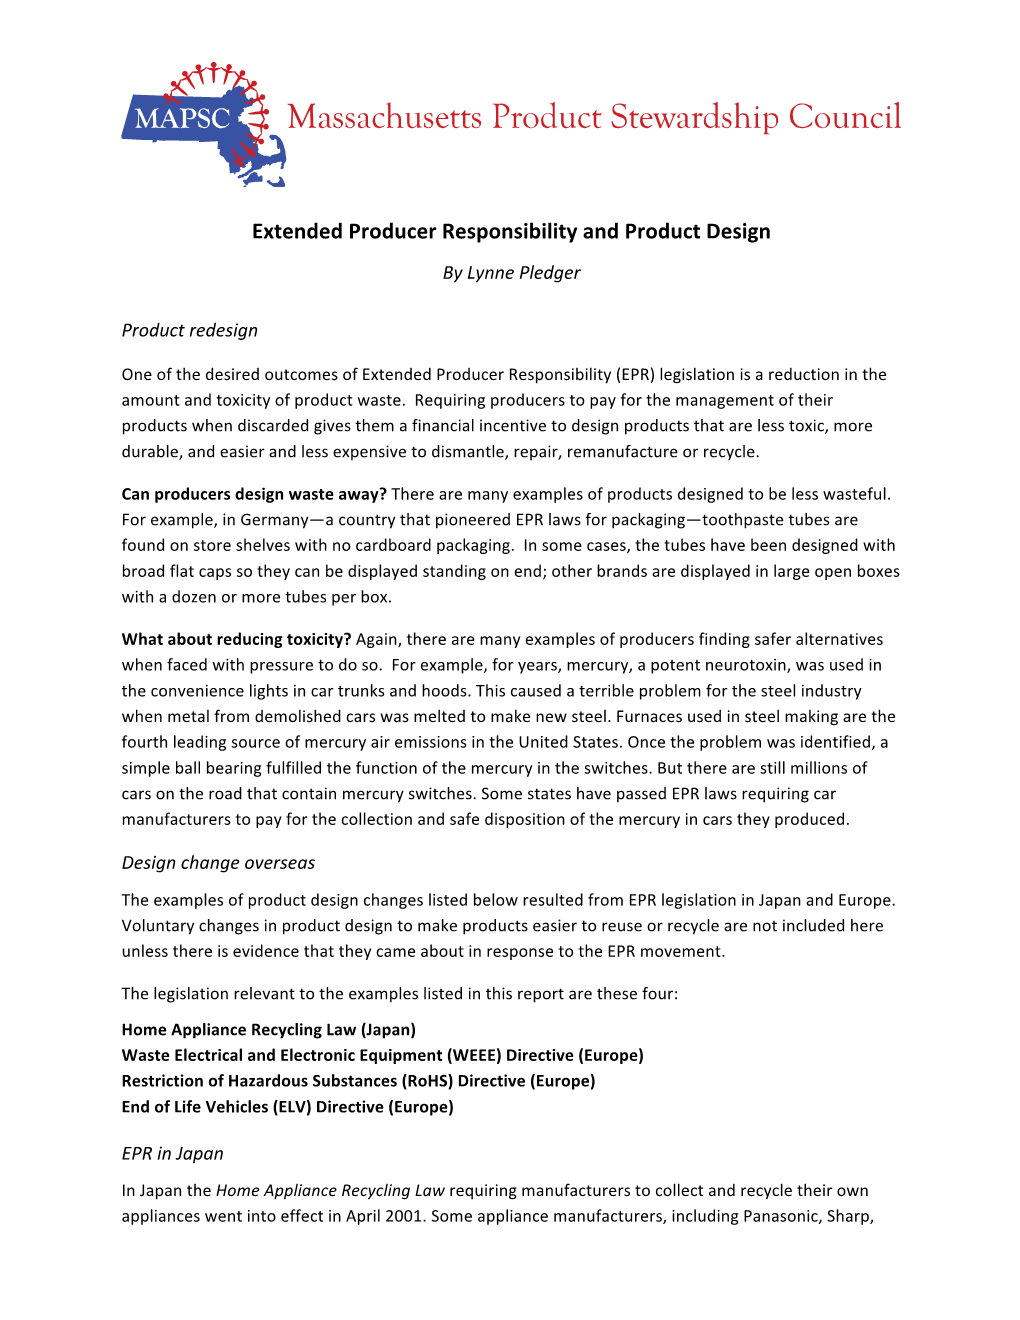 Extended Producer Responsibility and Product Design by Lynne Pledger